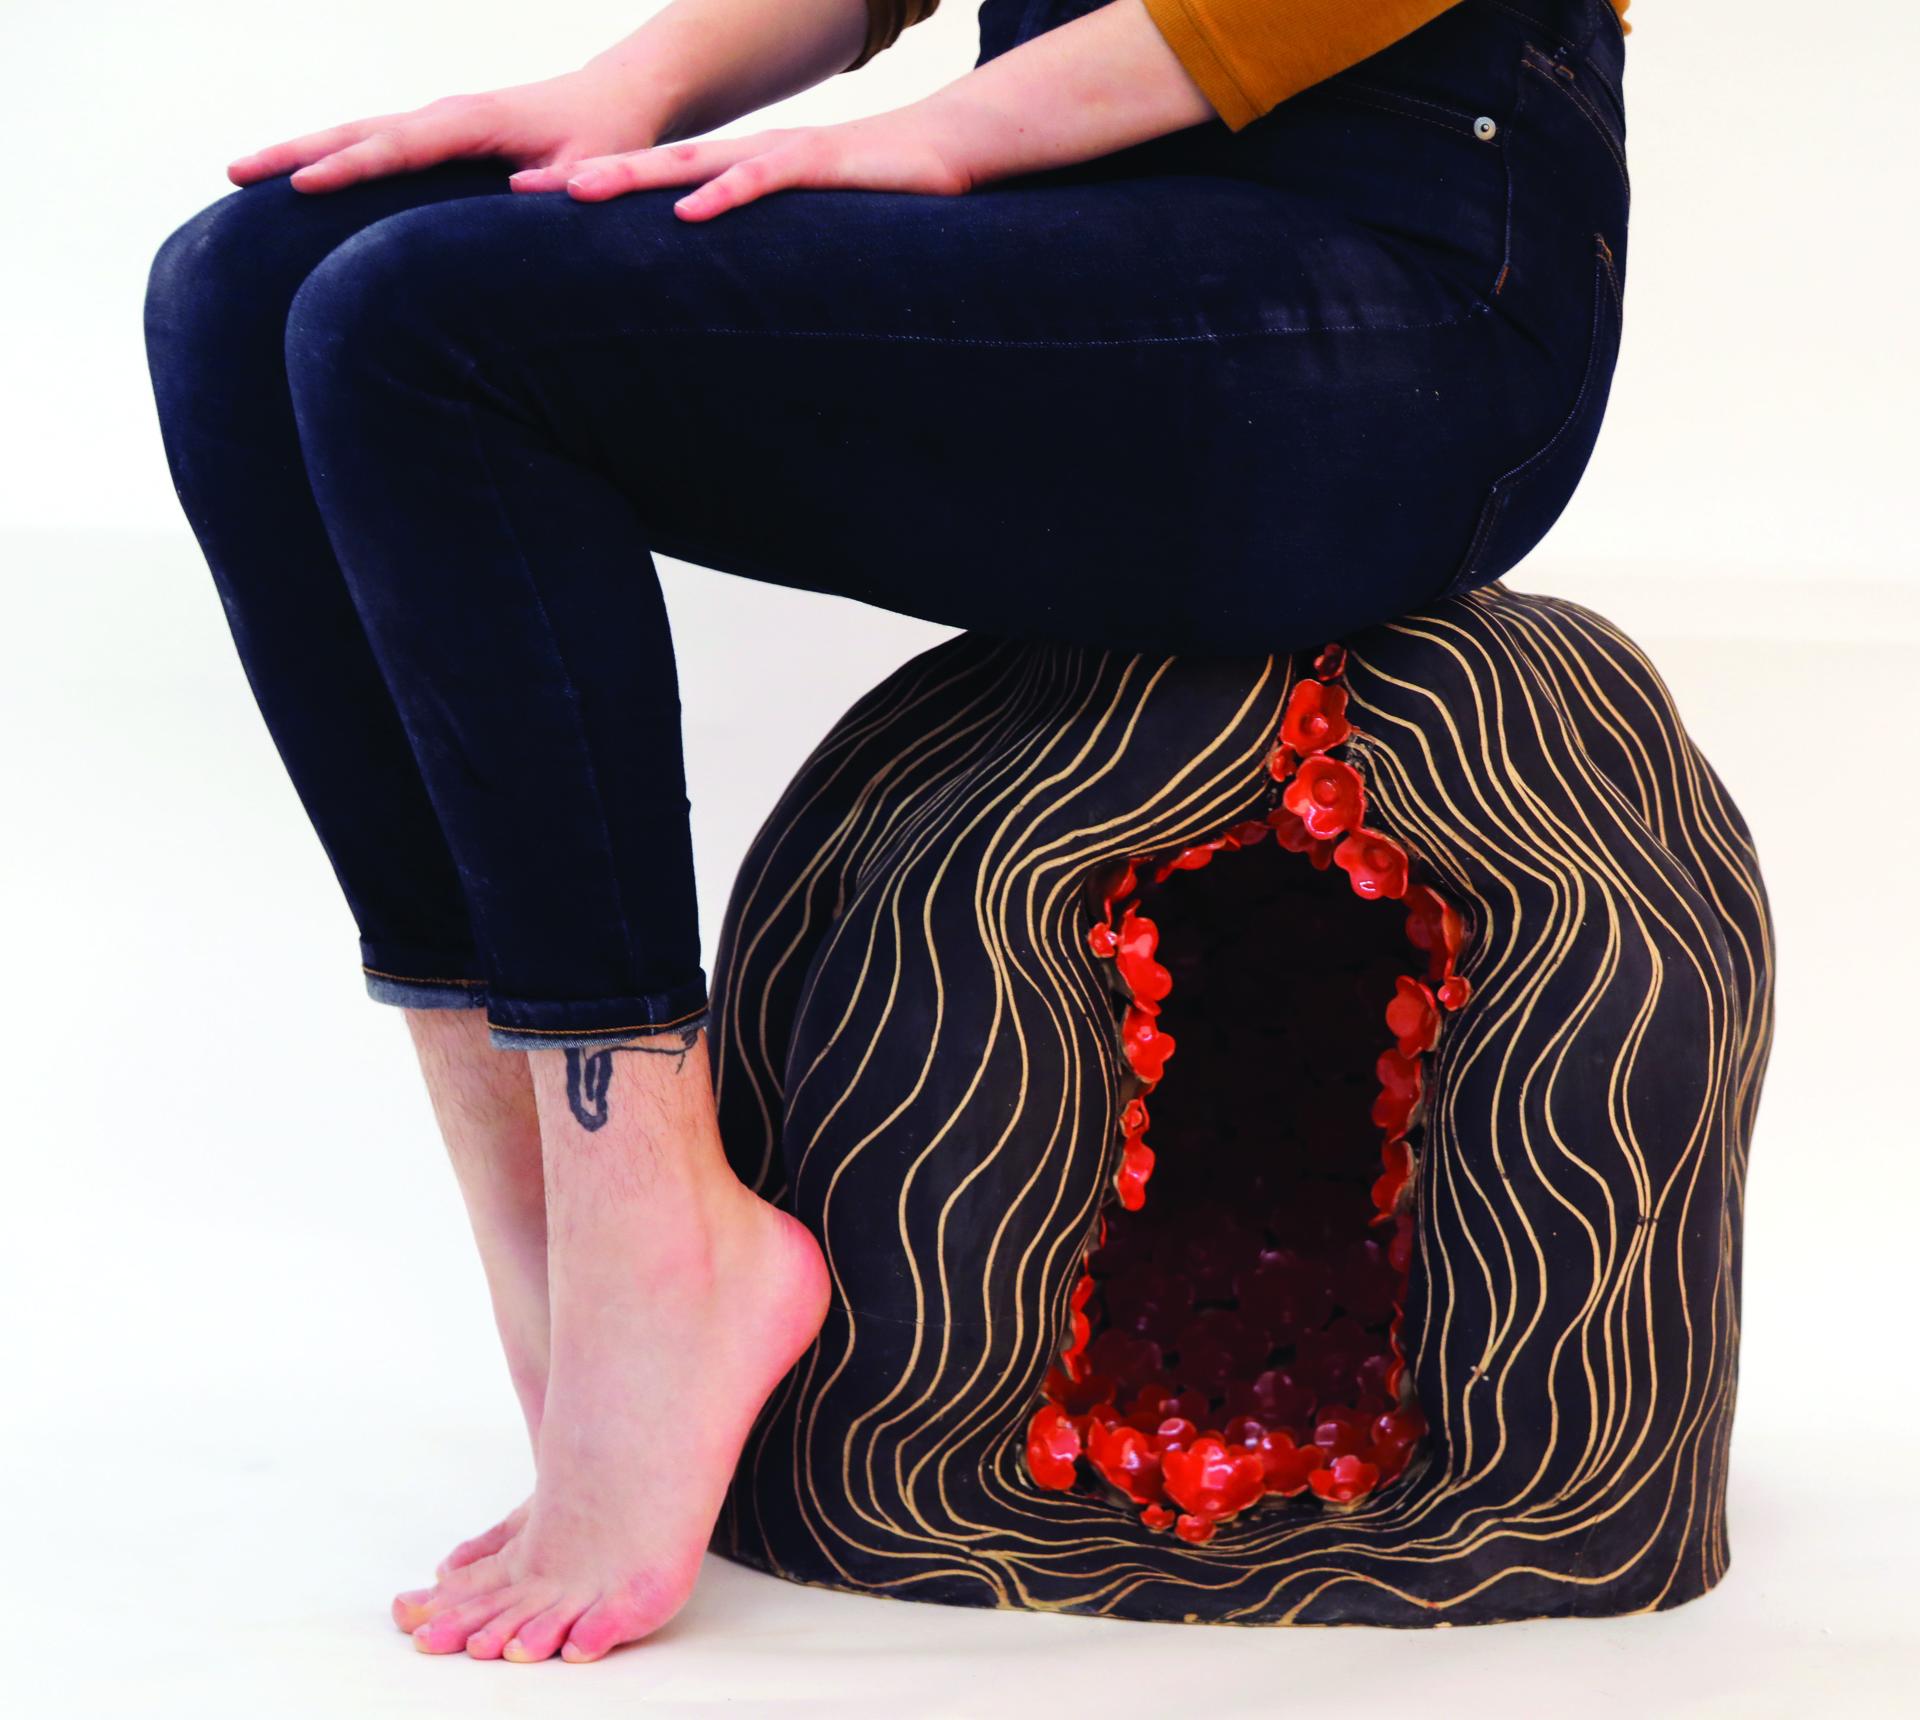 Image of a person from the waist down sitting on a ceramic head with red flowers inside its cavity.